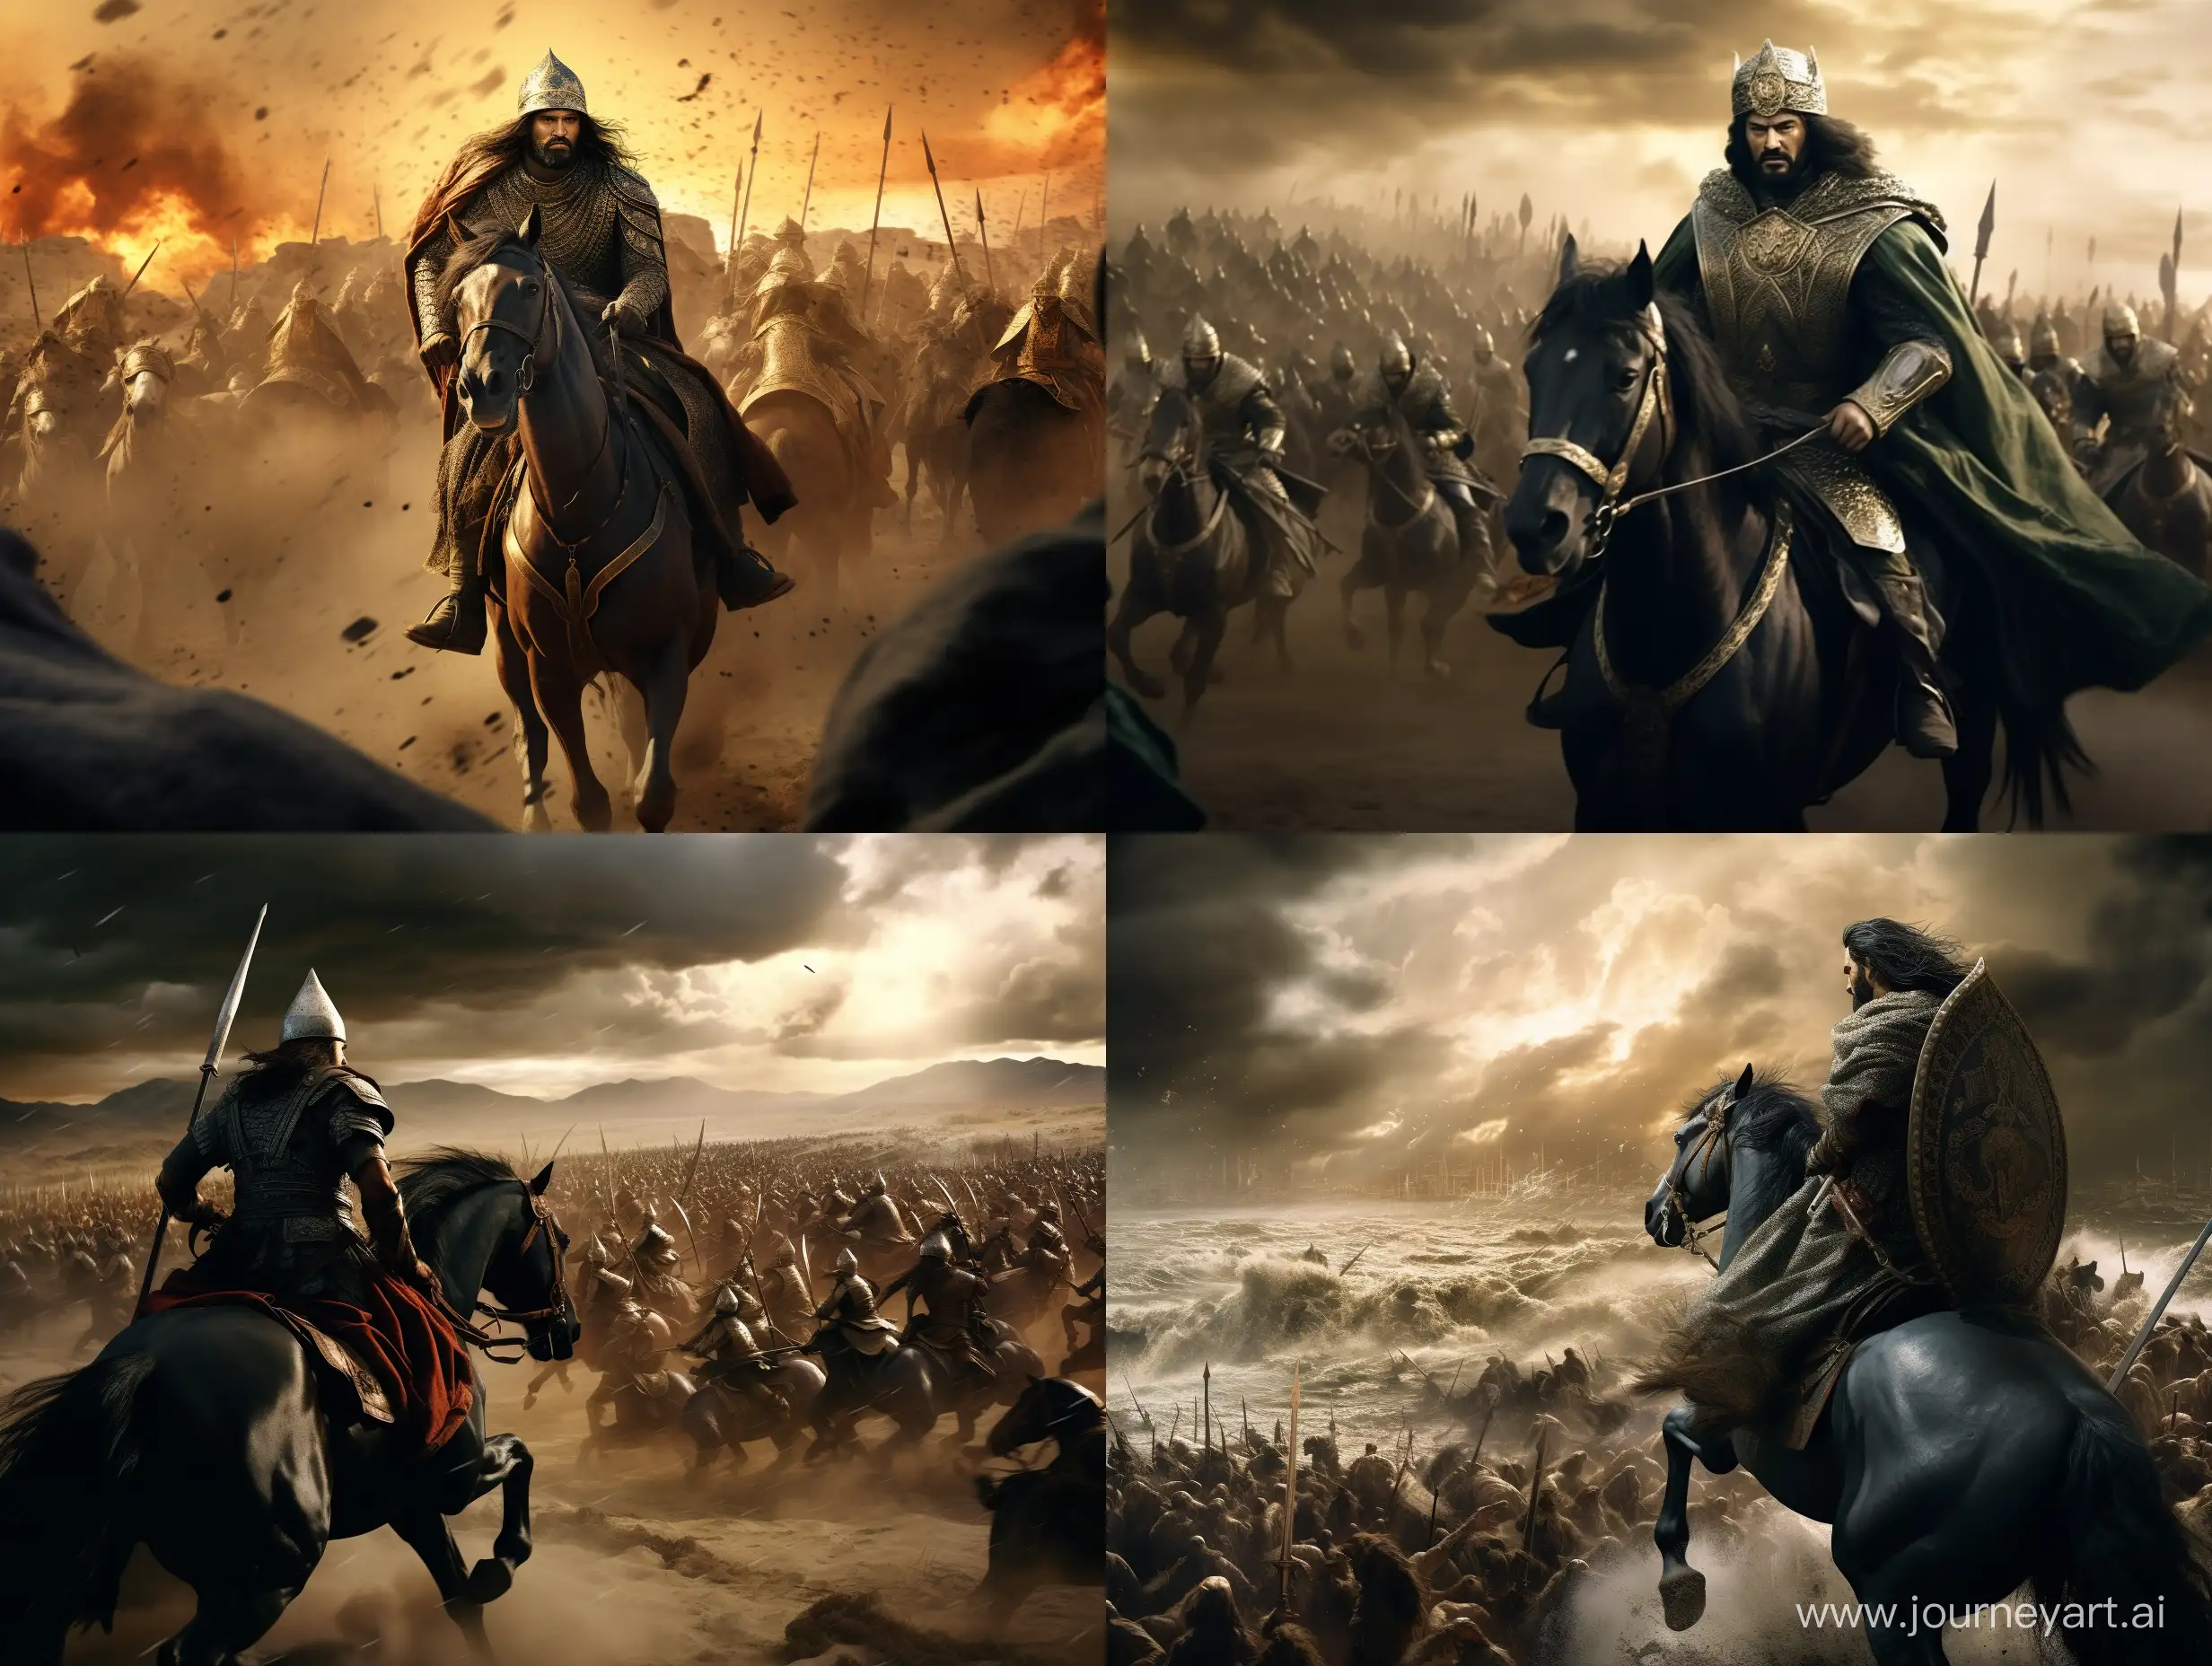 Epic-Battle-of-Saladin-Against-the-Crusaders-in-Cinematic-Drama